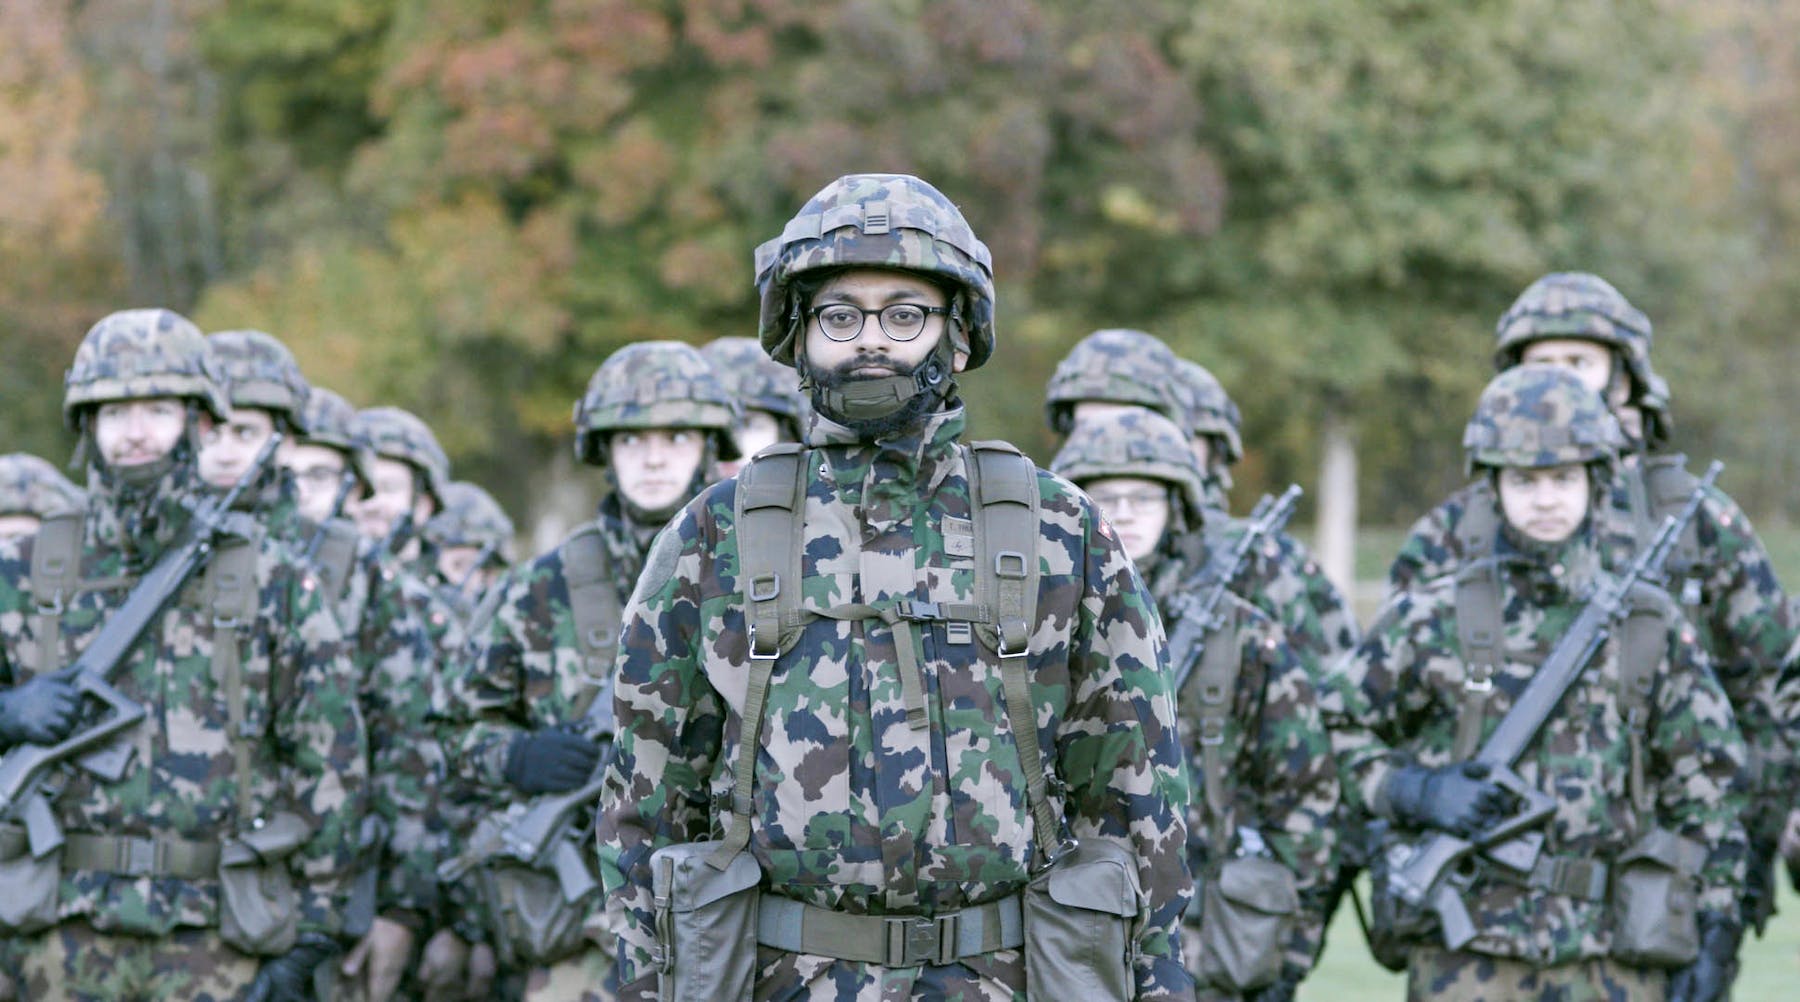 Group of soldiers in camouflage